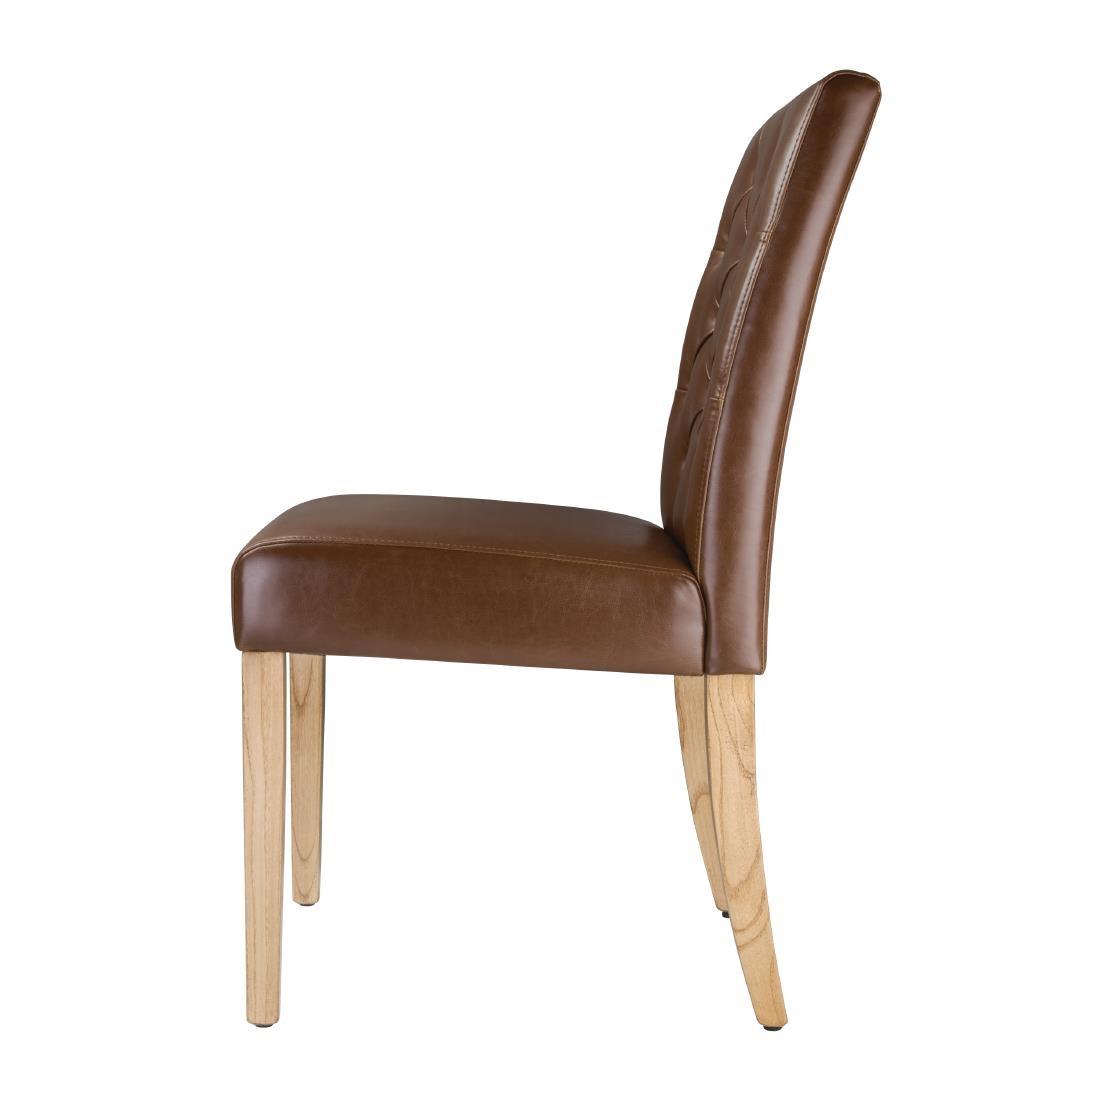 Bolero Chiswick Button Dining Chairs Tan Leather (Pack of 2) - DT699  - 2